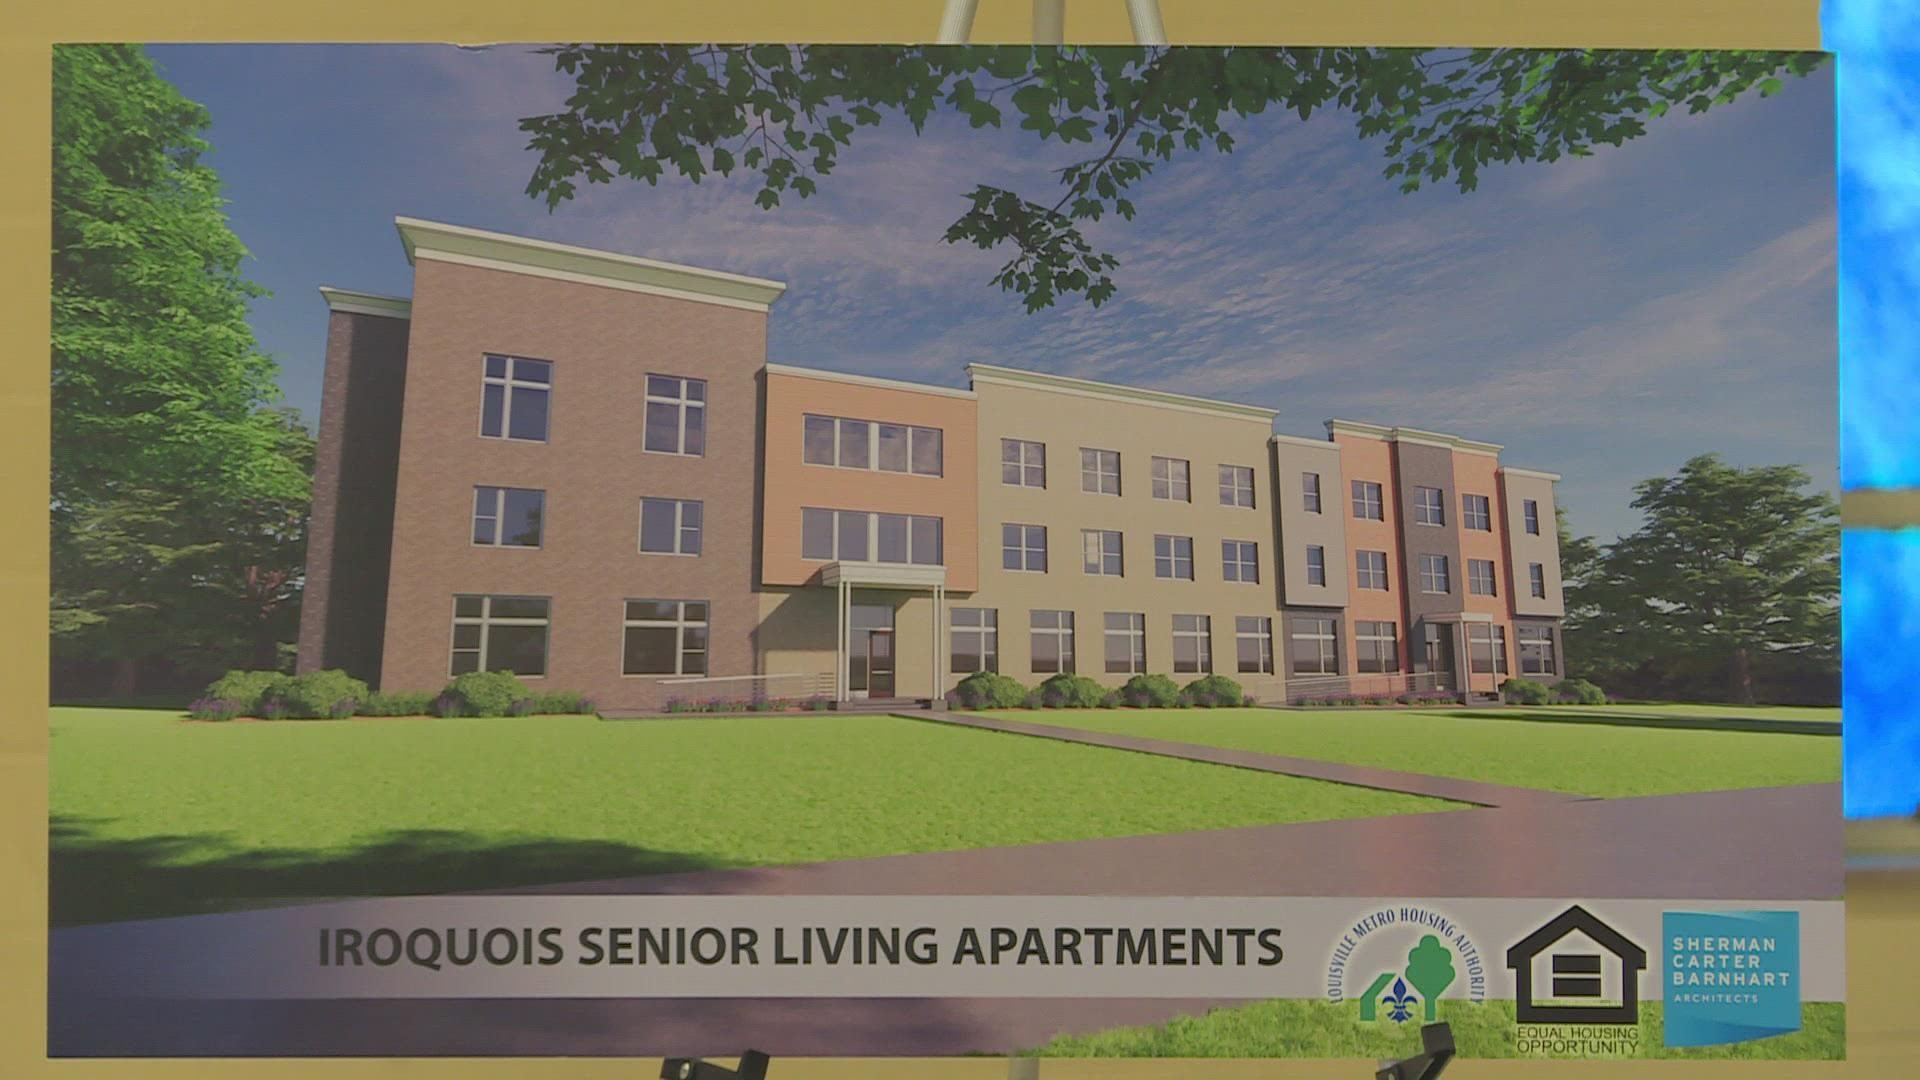 Lisa Osanika says Louisville Metro Housing Authority is working to secure funding to bring residents' visions to life.